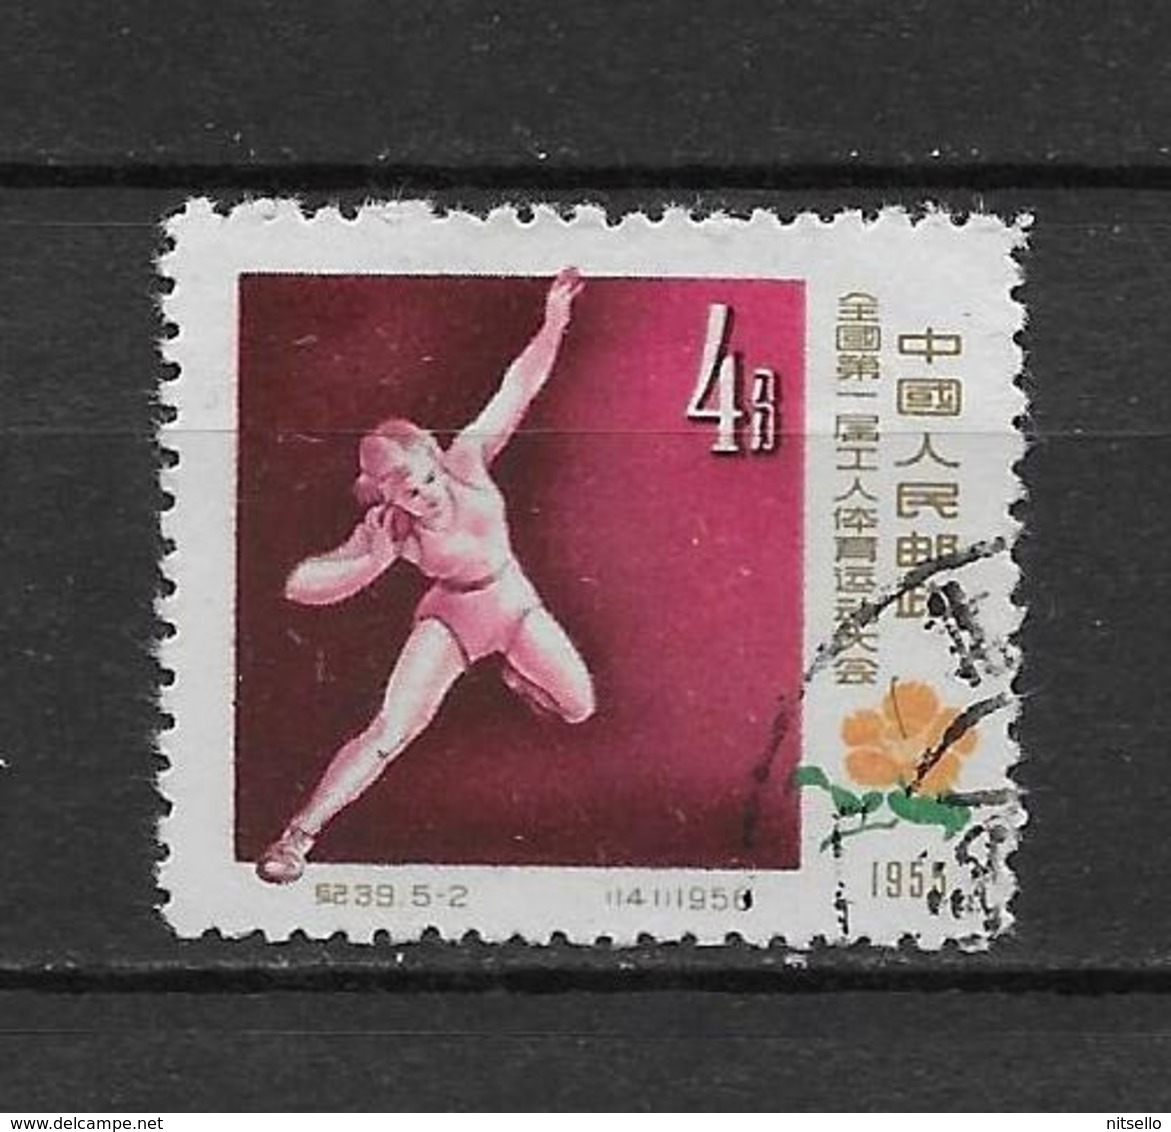 LOTE 1799   ///  (C062) CHINA  LUXE MICHEL Nº:  330 - 1st All China Workers' Athletic Meet, Shot - Used Stamps